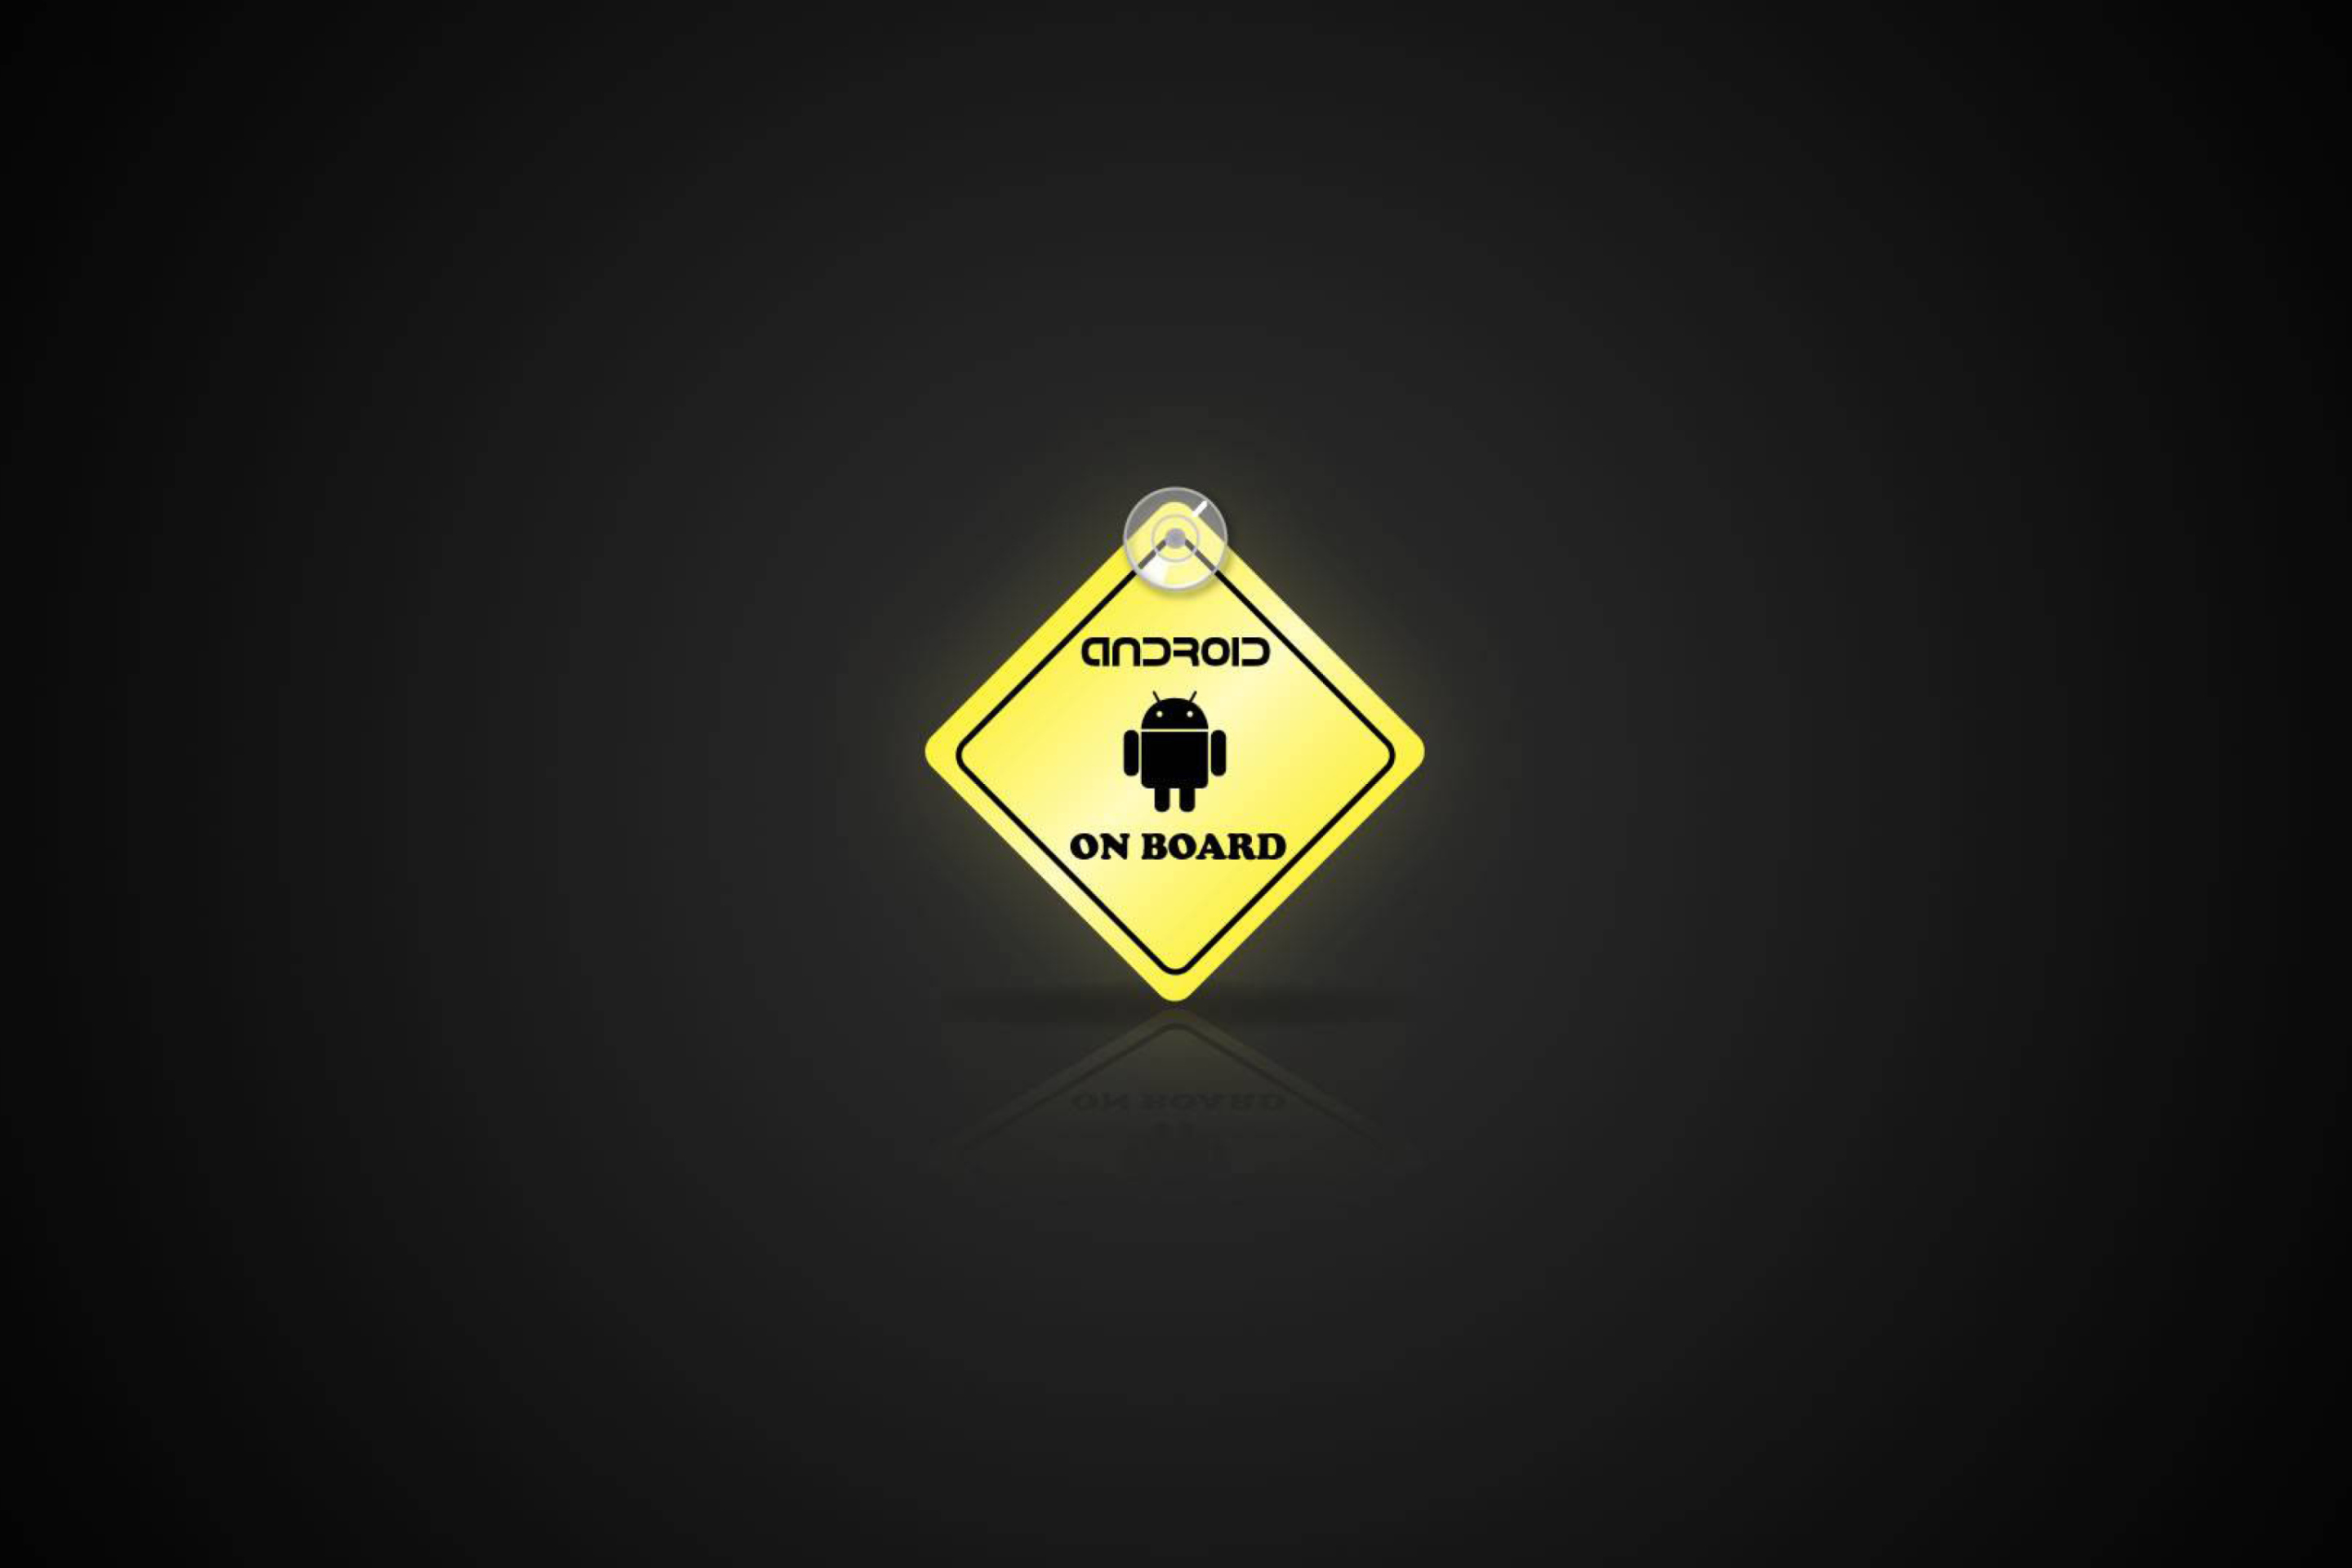 Android On Board wallpaper 2880x1920